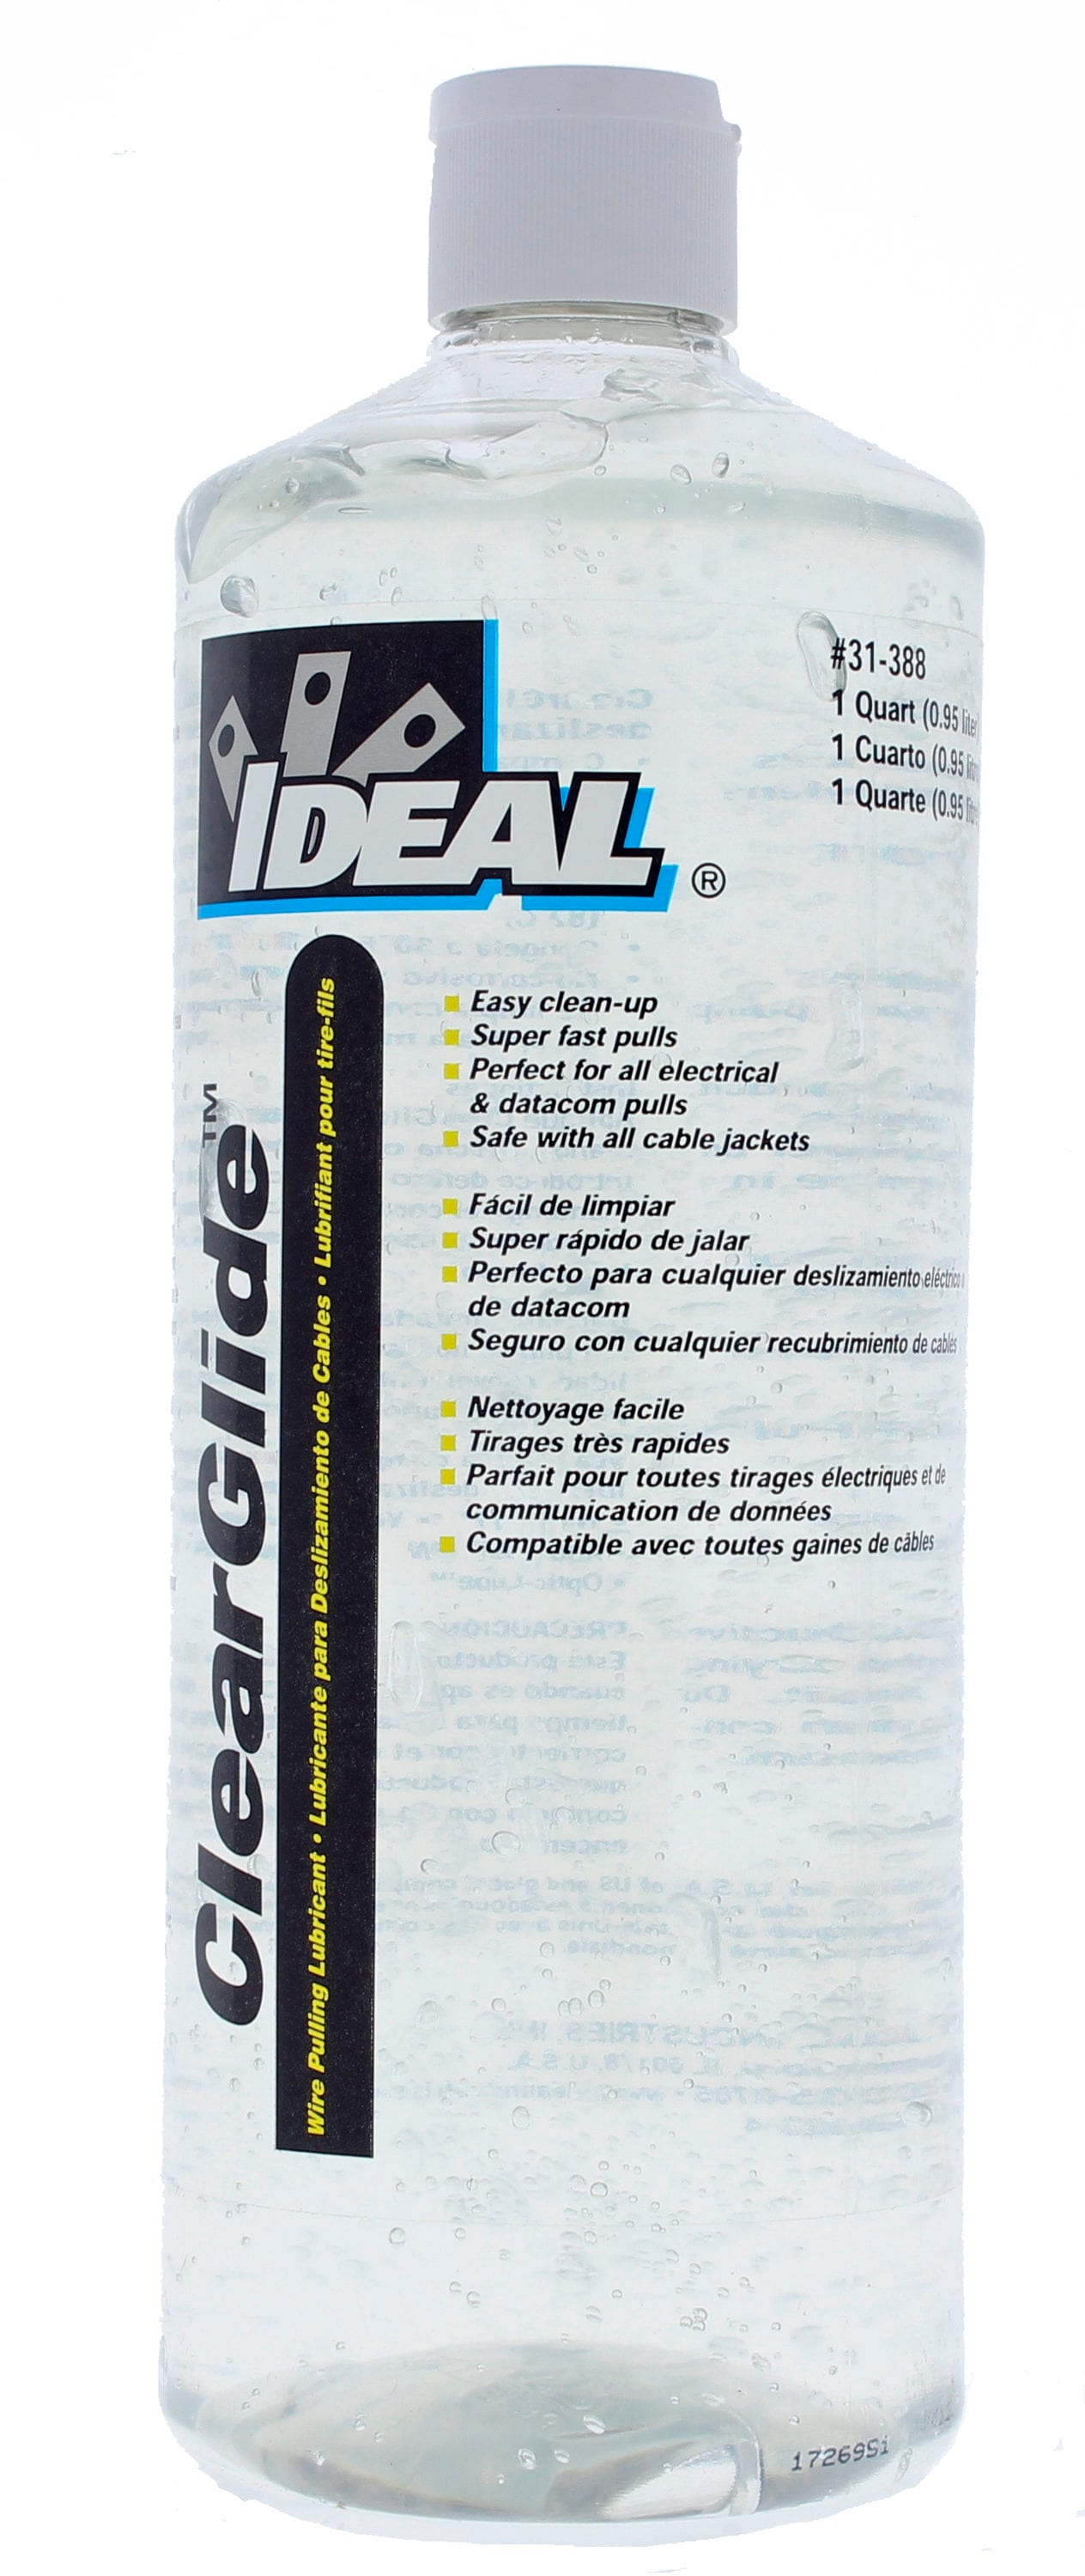 IDEAL Clear Glide Wire Pulling Lubricant in the Wire Pulling